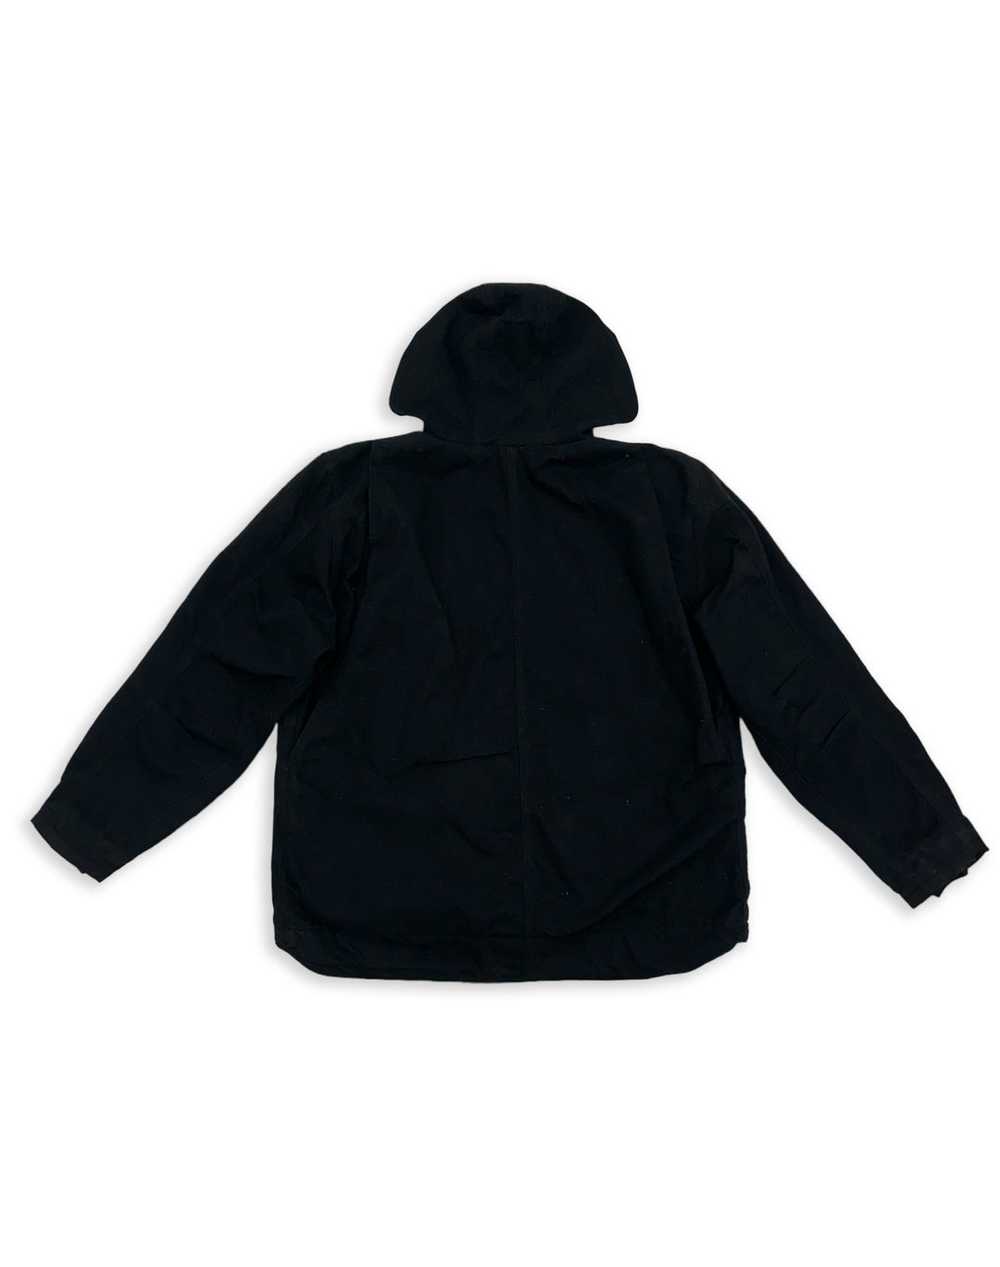 CARHARTT BLACK LOOSE FIT BUTTON JACKET (XL) - image 2